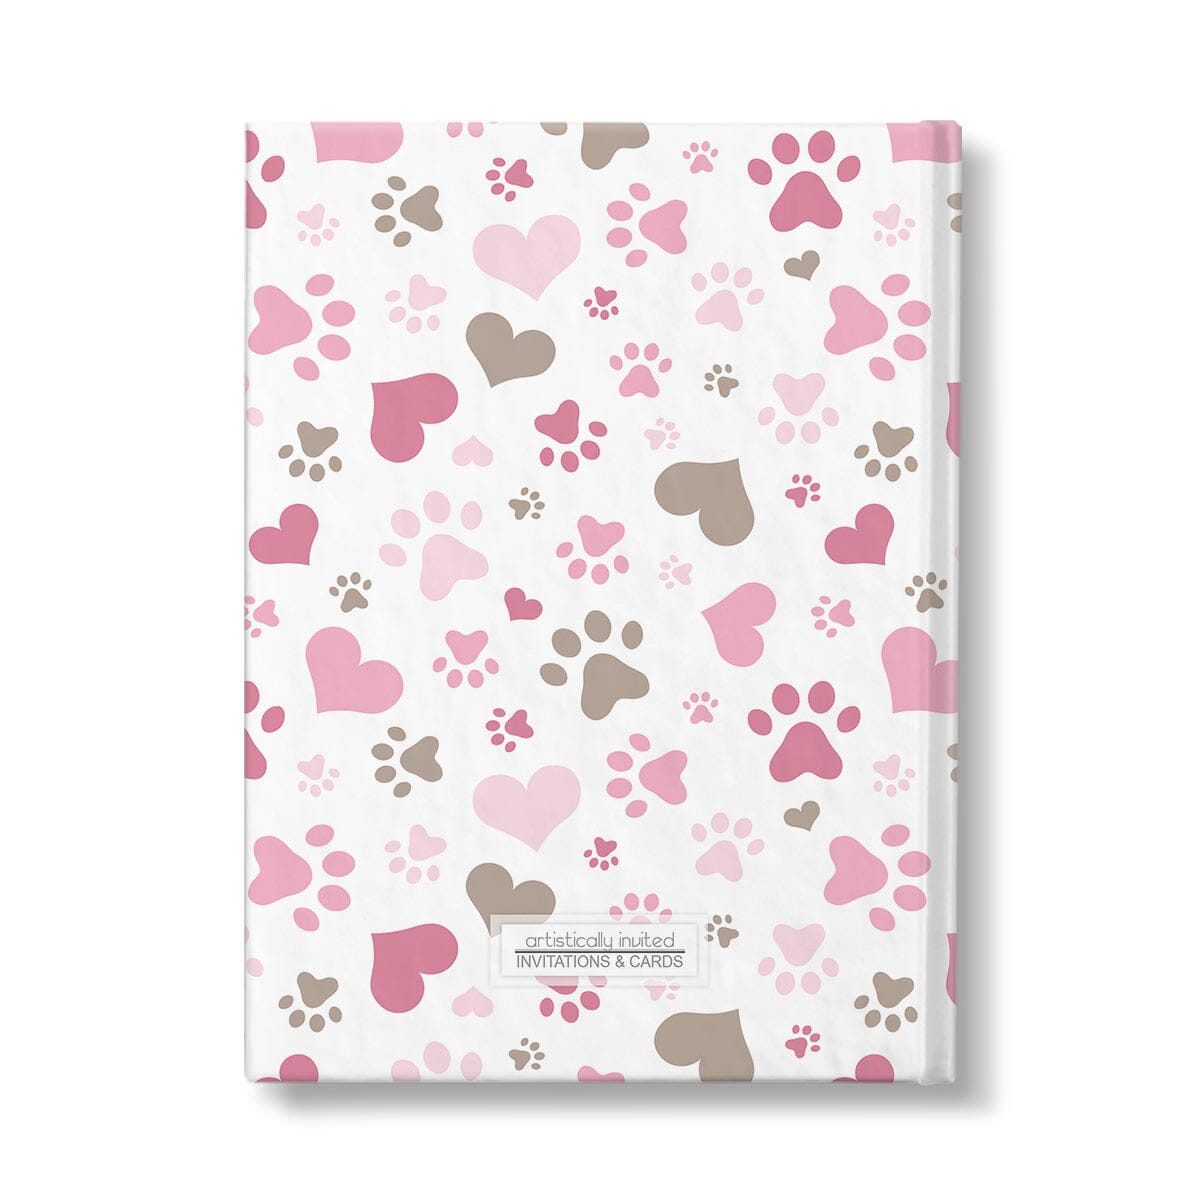 Personalized Pink Hearts and Paw Prints Journal at Artistically Invited. Back side of the book.